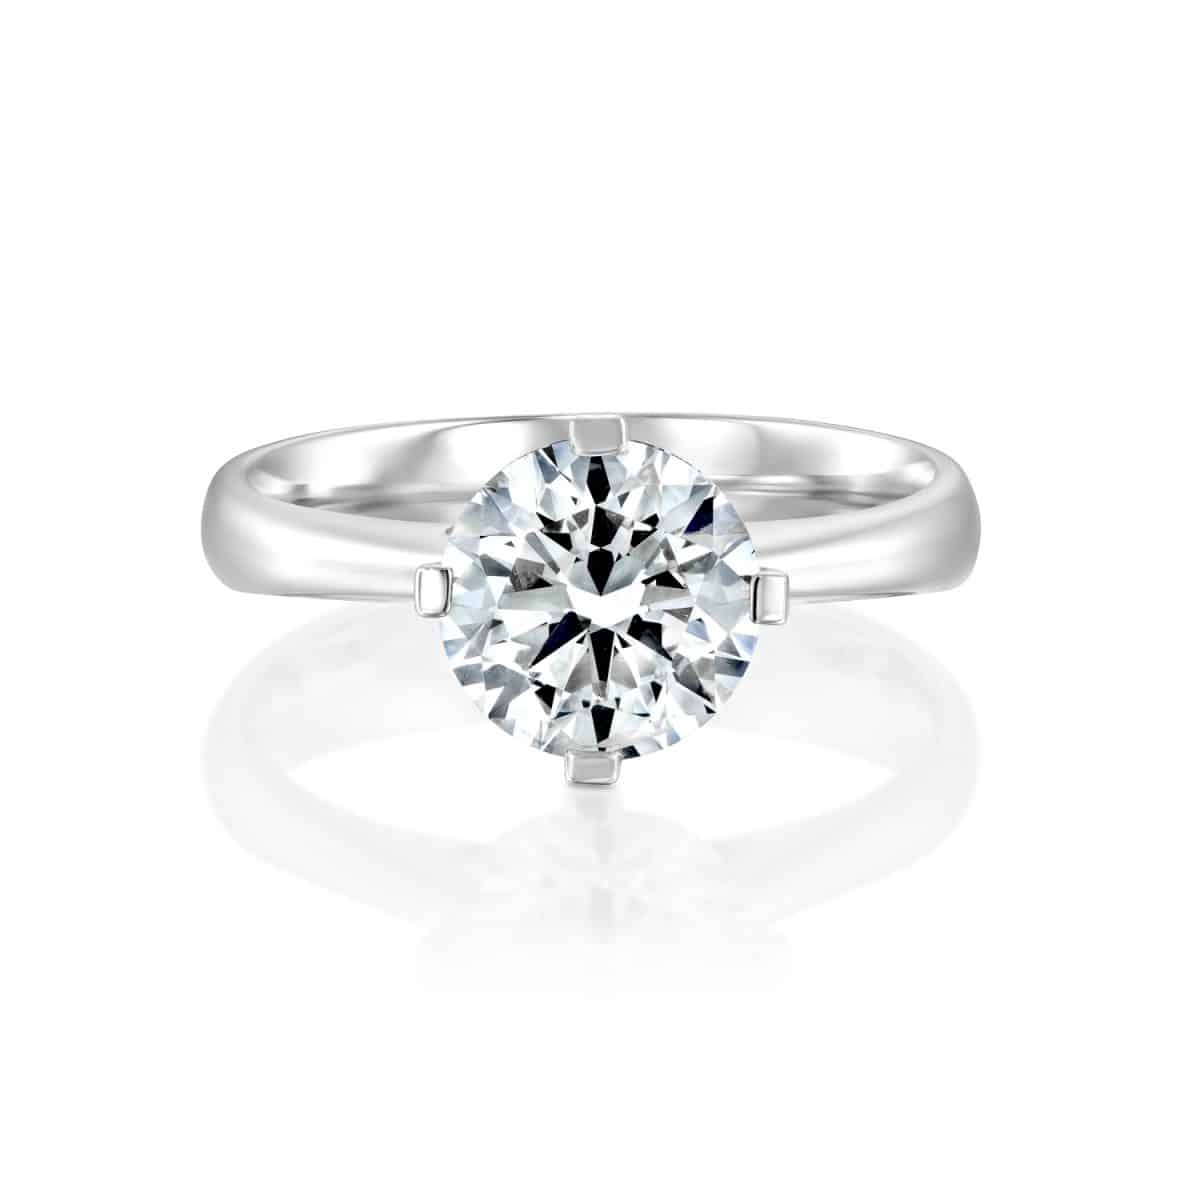 "Mary" - Solitaire Lab Grown Diamond Engagement Ring 1.51ct. - laying